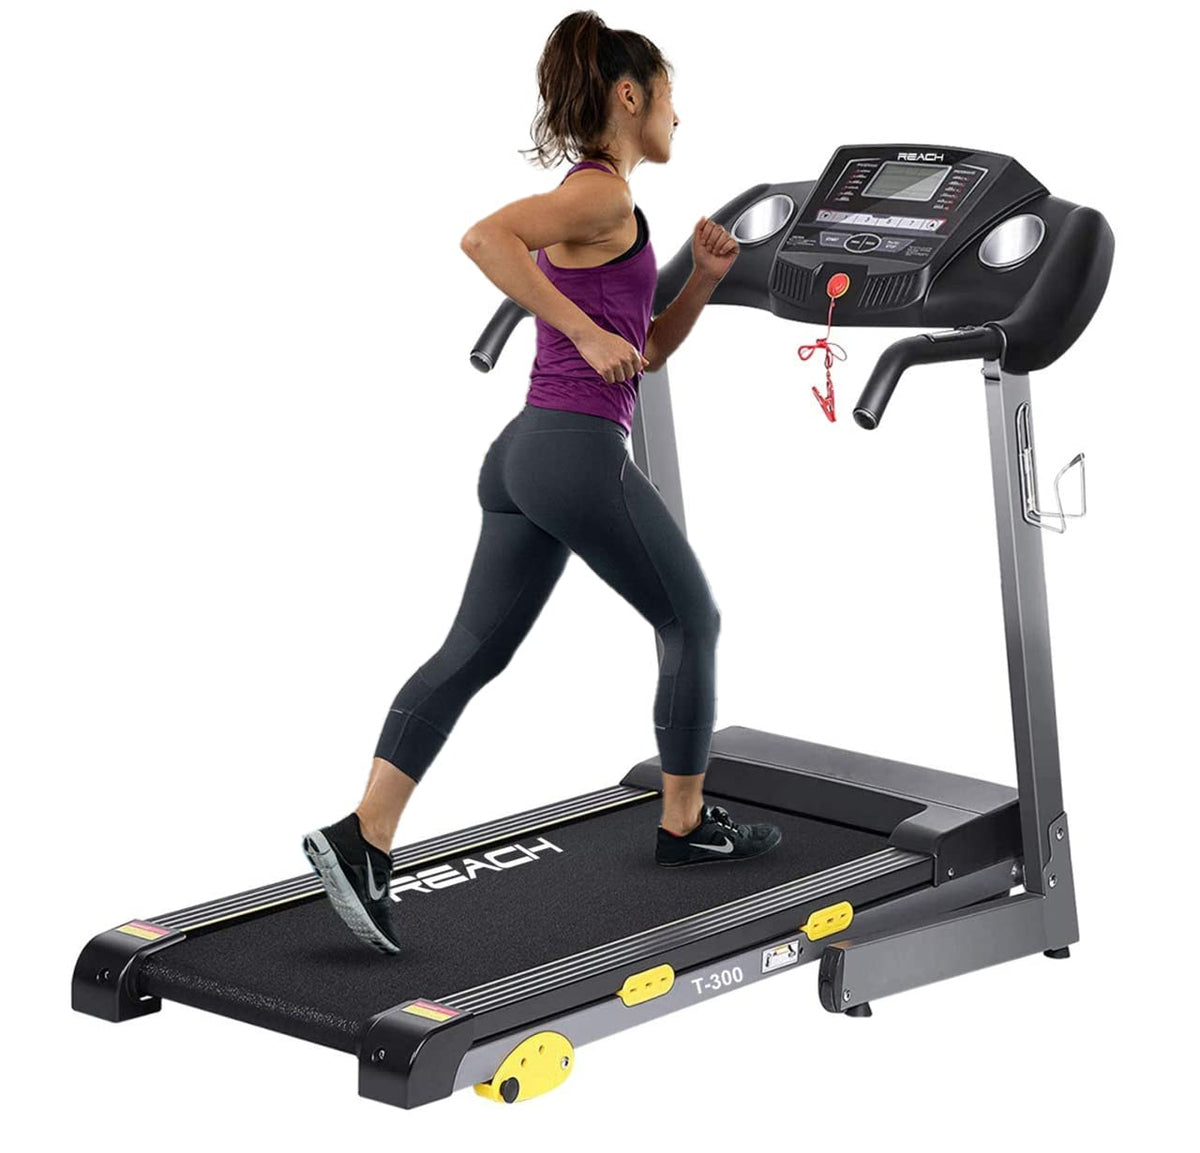 Reach T-300 [4 HP Peak] Motorized Treadmill for Home Gym | Hydraulic Foldable Exercise Machine with Manual Incline for Walking Jogging & Running & Cardio Fitness Training | Max User Weight 100 Kgs 12 km/hr